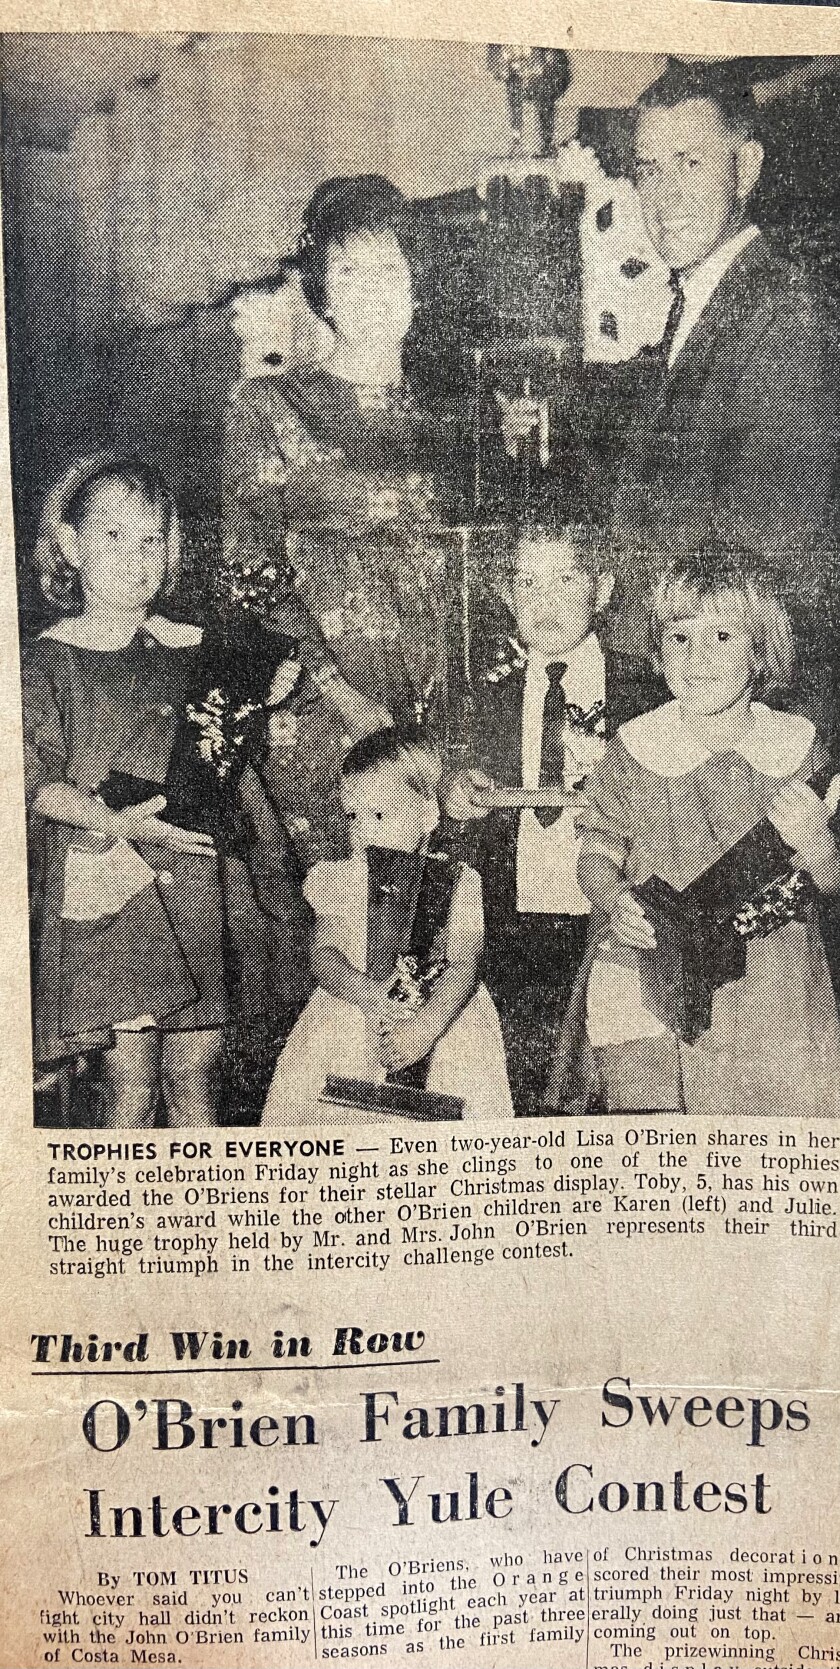 A Daily Pilot clipping shows the O'Brien family of Costa Mesa receiving an award in an Inter-City Yule Contest in 1961.